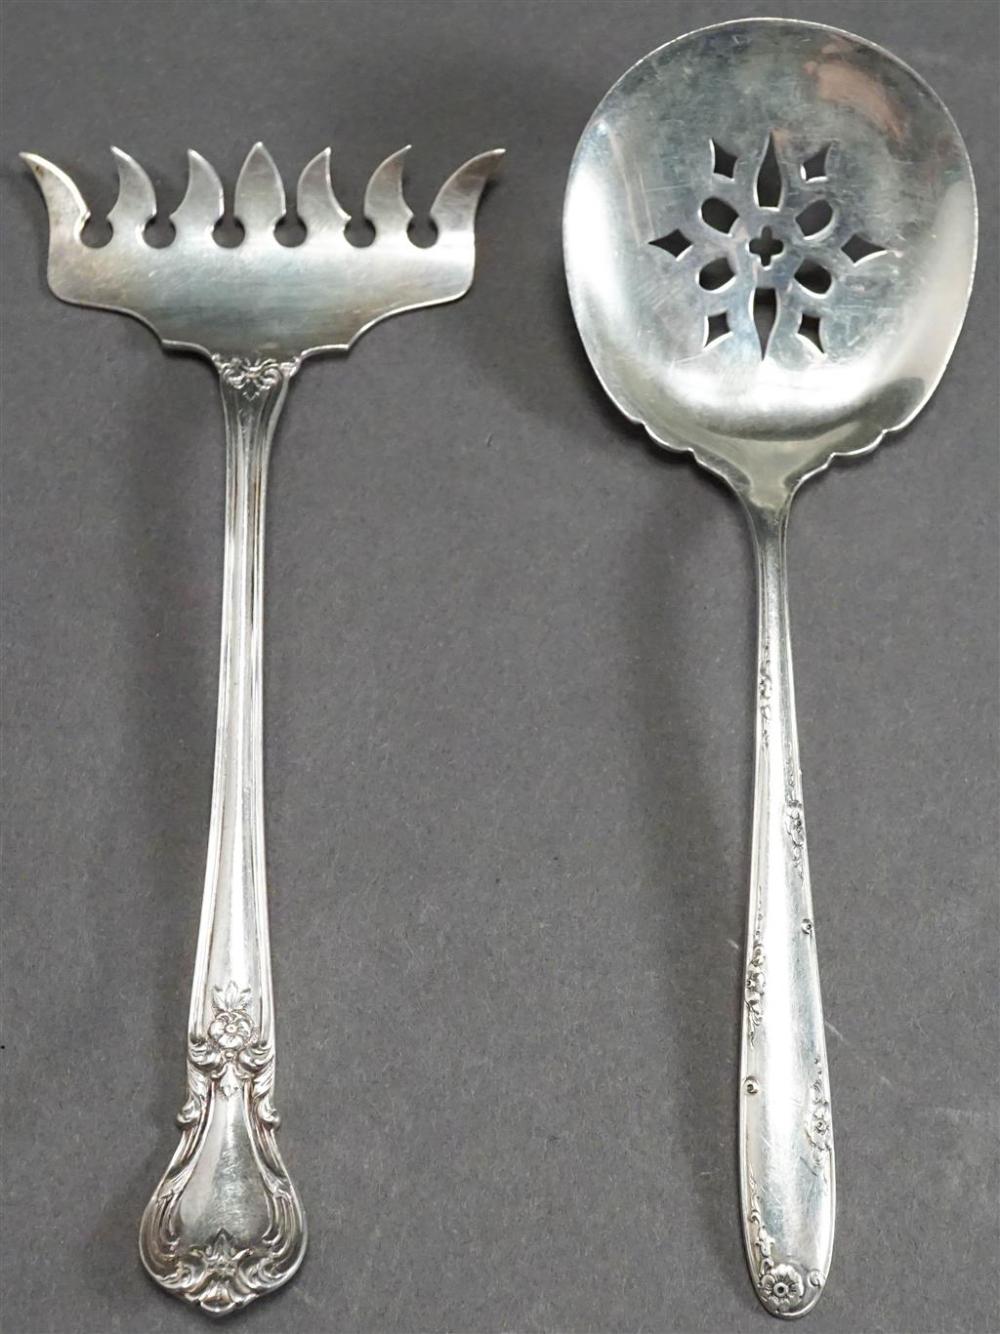 TOWLE MADEIRA PATTERN JELLY SPOON